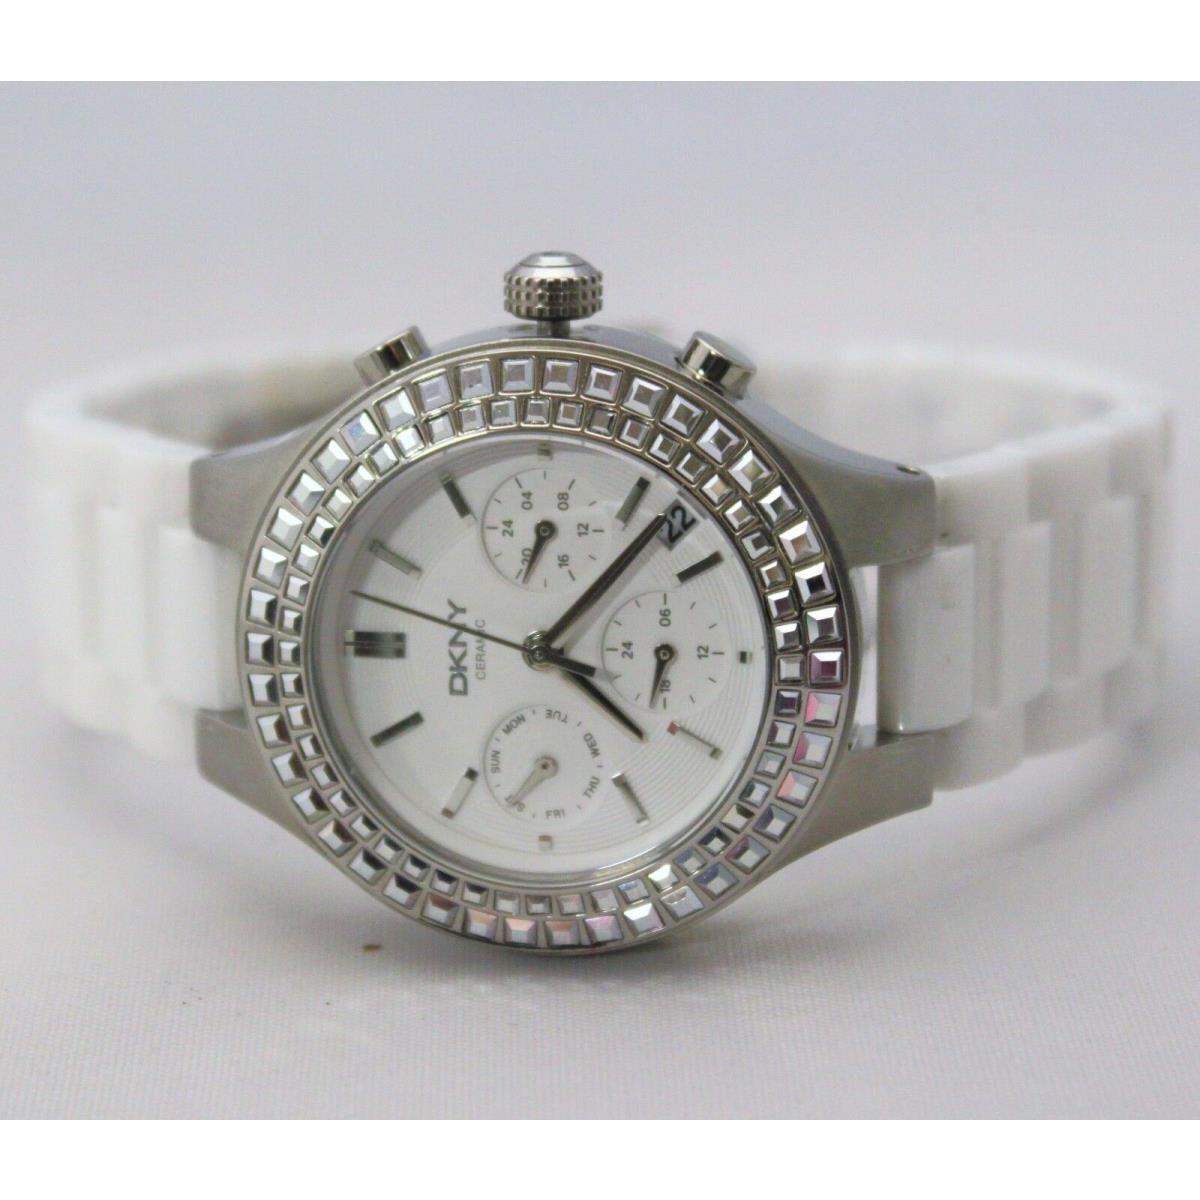 DKNY watch  - White Face, White Dial, White Band